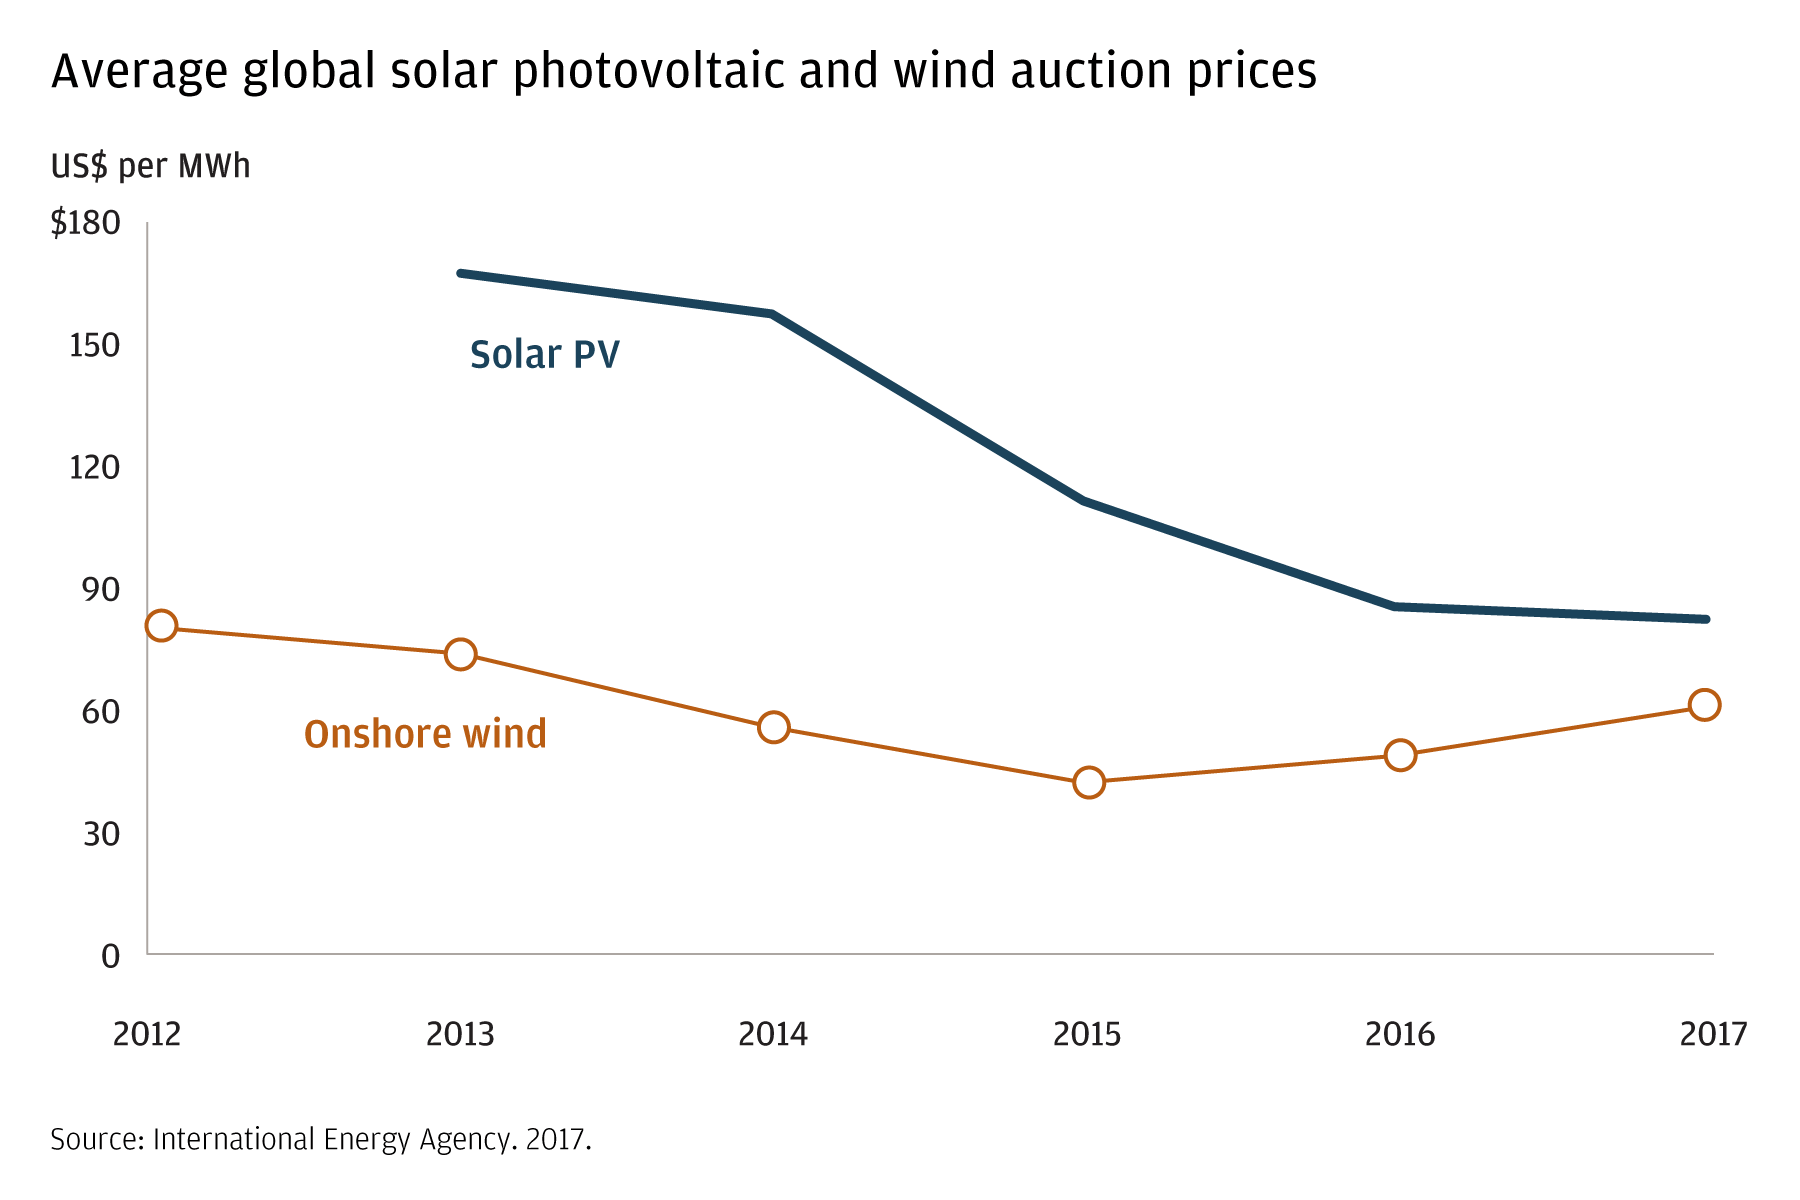 This chart shows changes in the prices paid at auction for wind and solar photovoltaic (in dollars per MWh). Between 2012 and 2017, the prices of both have fallen, with solar PV prices falling more significantly.